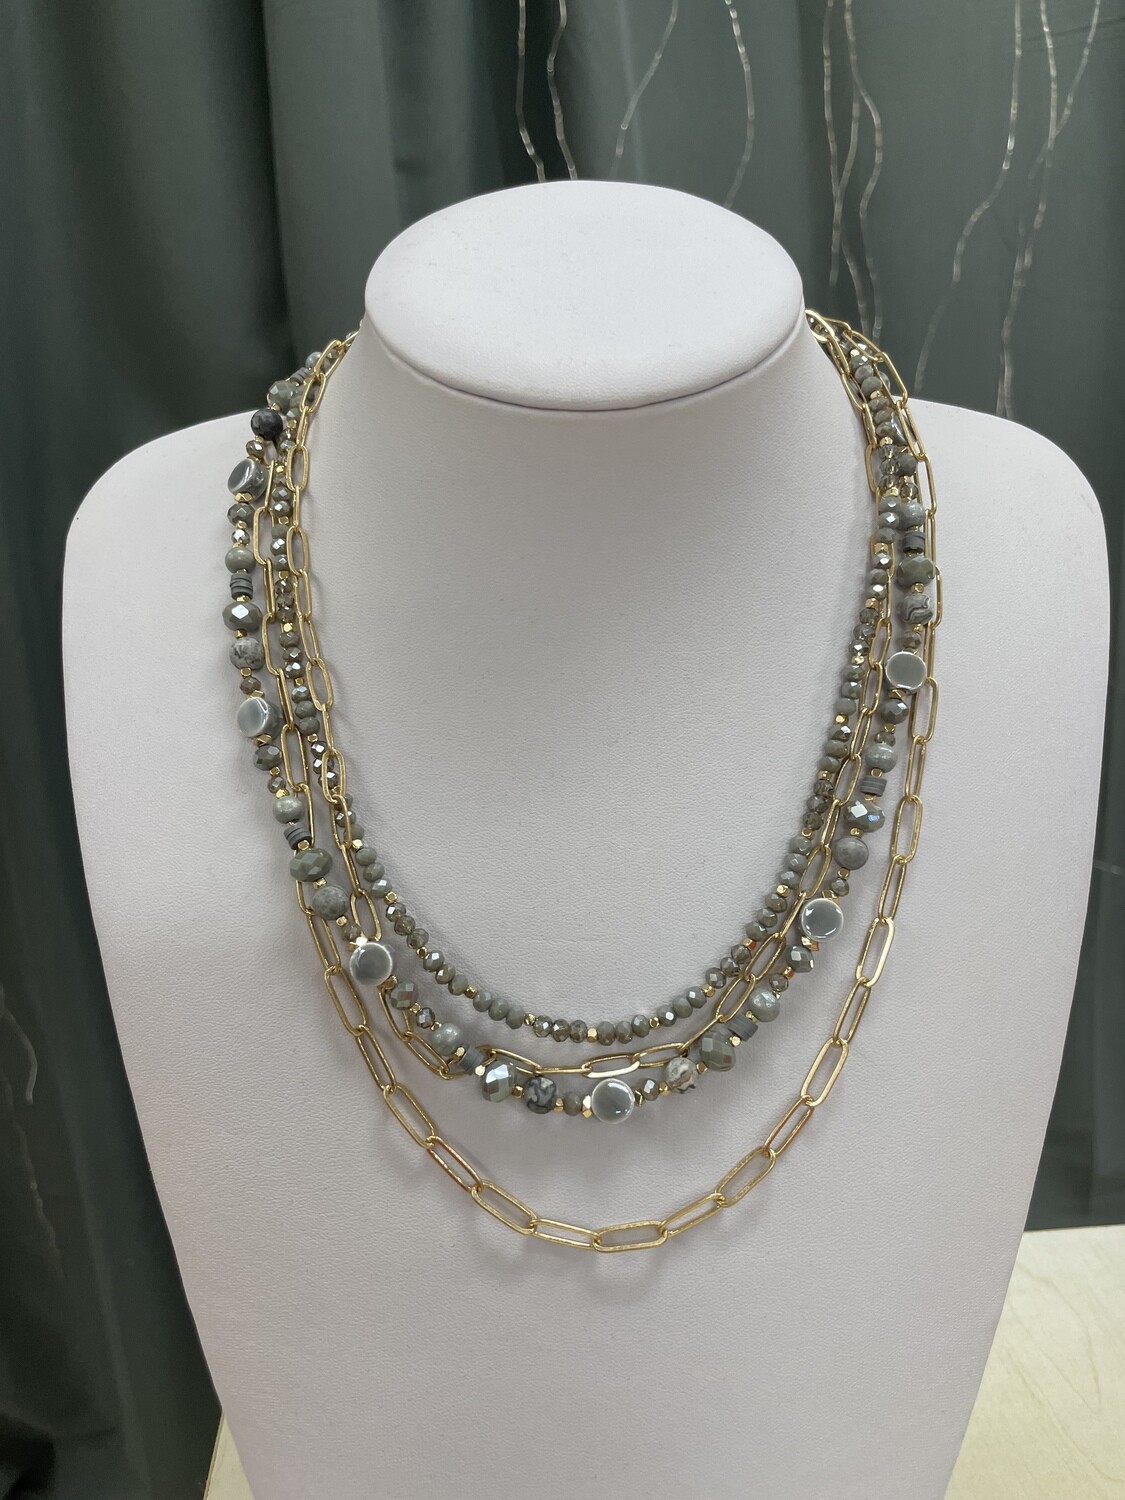 Four Layer Necklace Gold Chain Beaded Gray